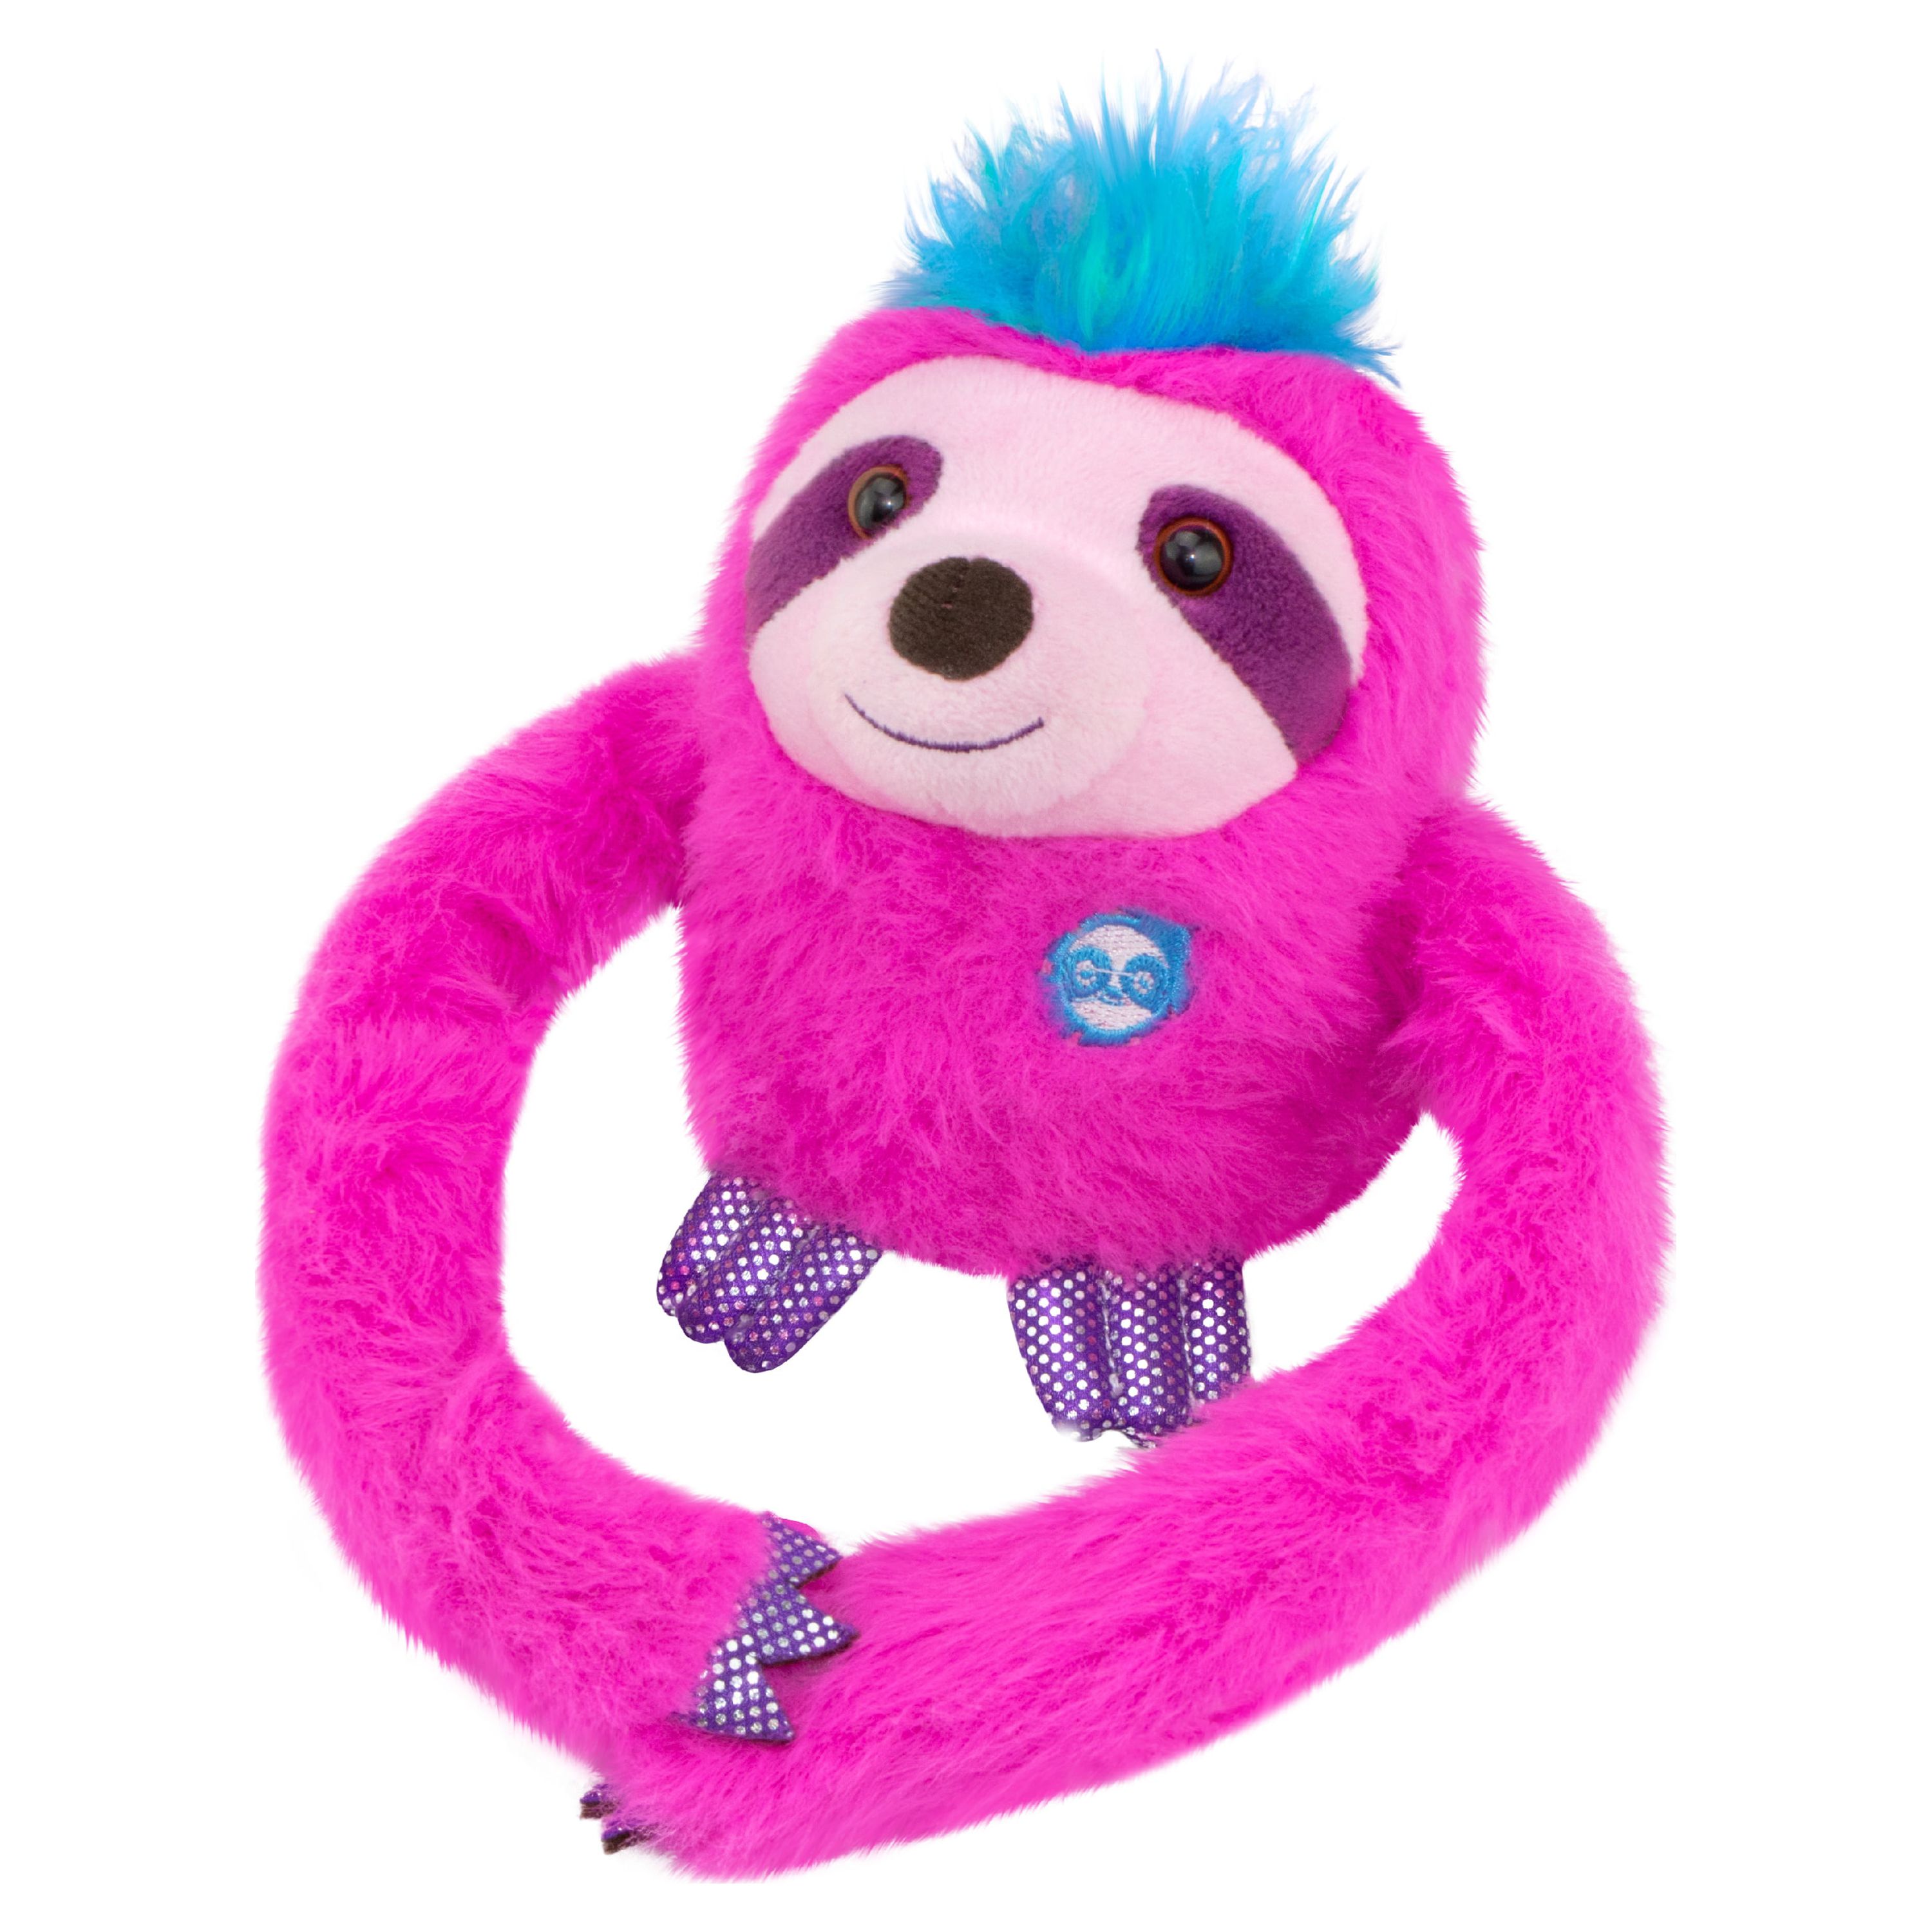 Little Live Pets Rollo the Sloth Electronic Pet with Bendable Arms, Movement, and Sounds - image 1 of 11